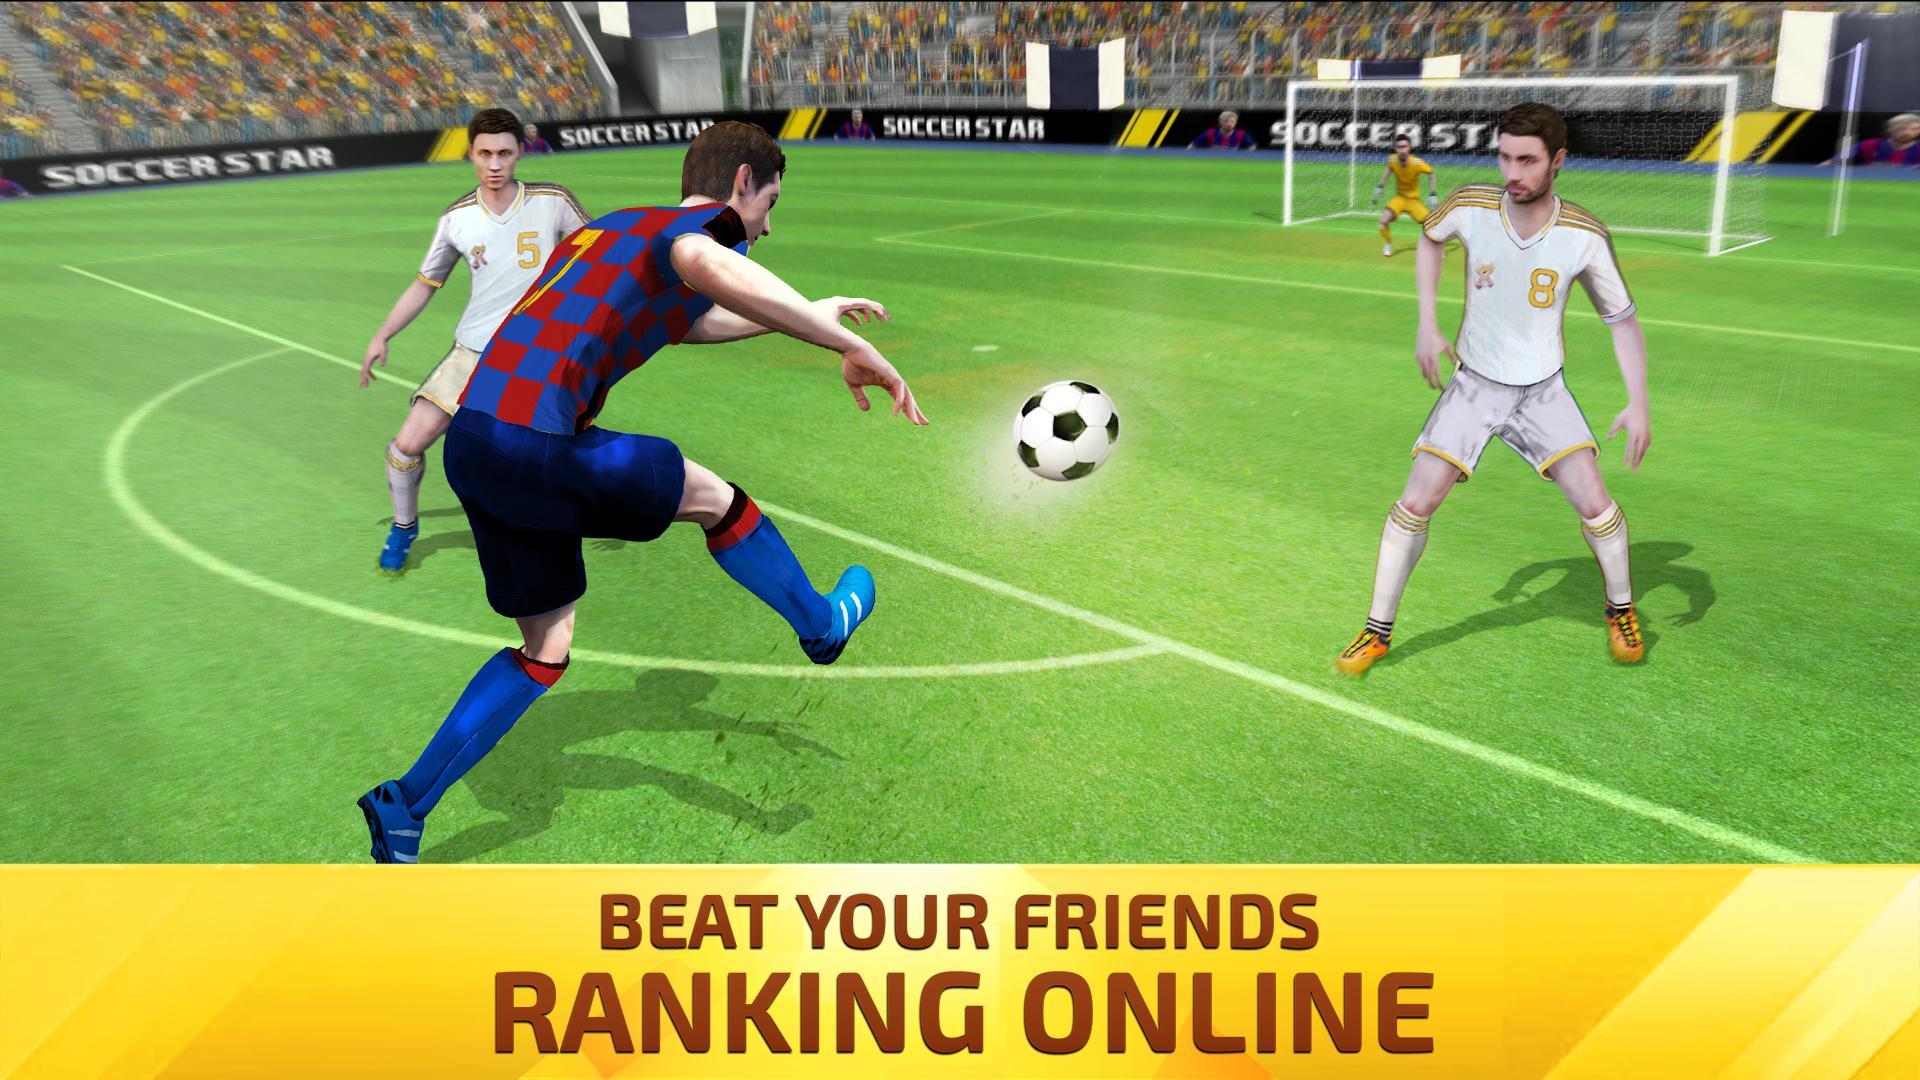 Soccer Star 2020 Top Leagues: Play the SOCCER game 2.4.0 Screenshot 4